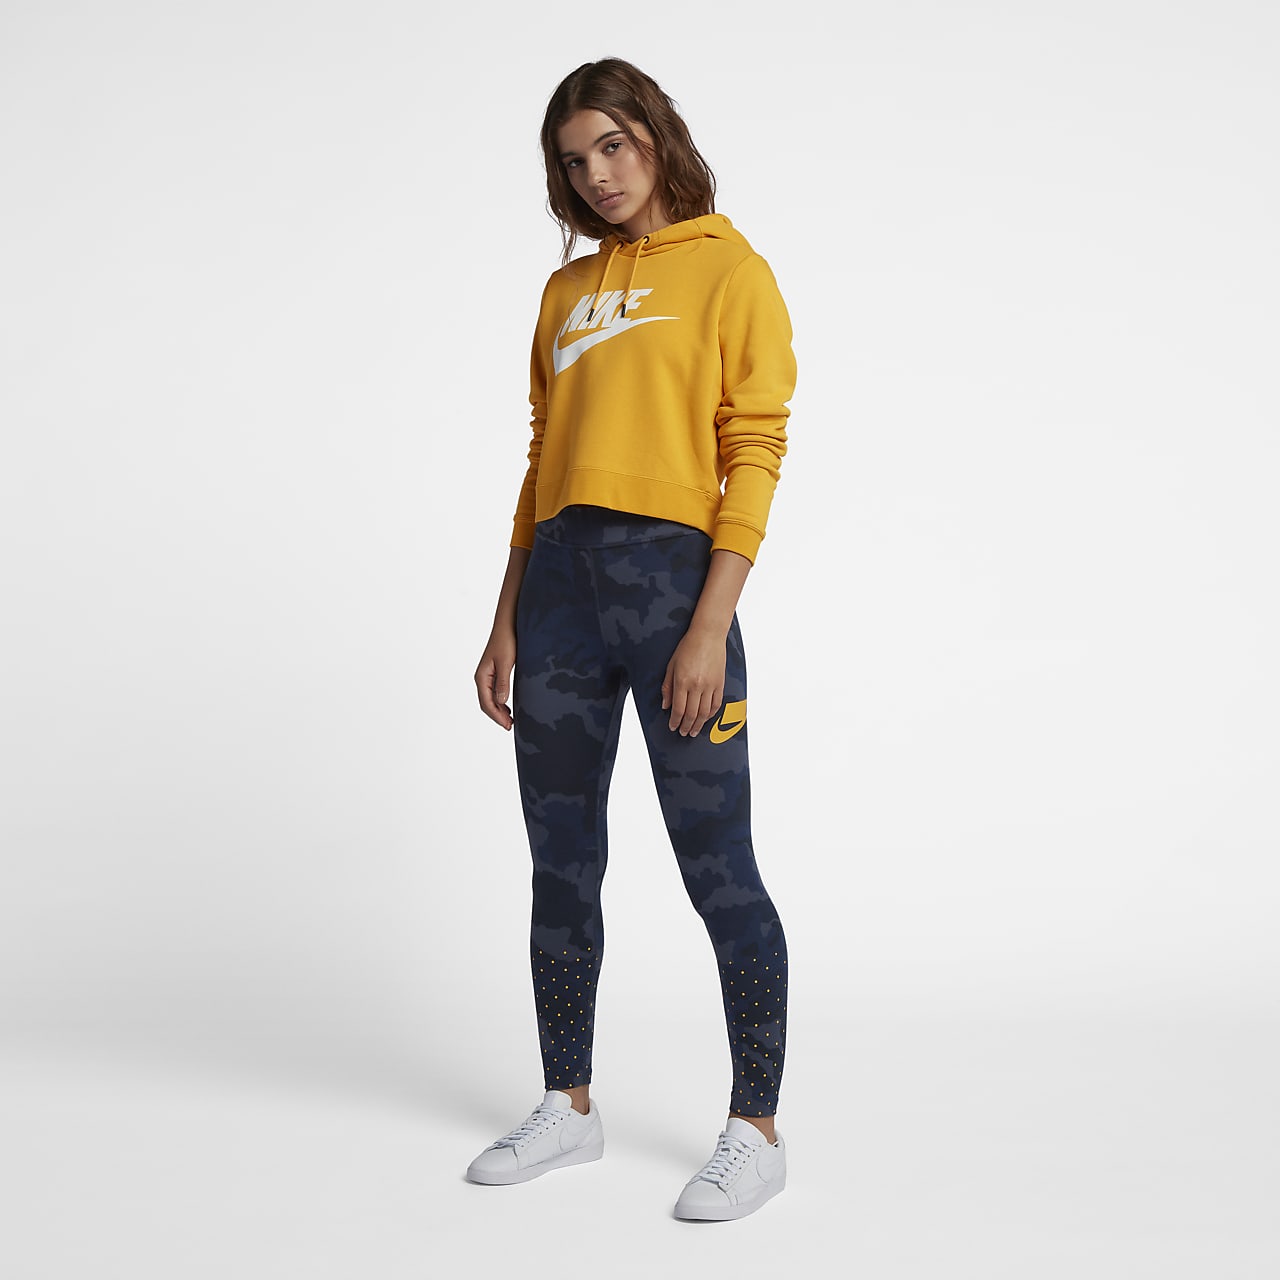 https://static.nike.com/a/images/t_PDP_1280_v1/f_auto,q_auto:eco/kepxeacmhmiddih9rwke/sportswear-rally-cropped-hoodie-RRnN2q.png